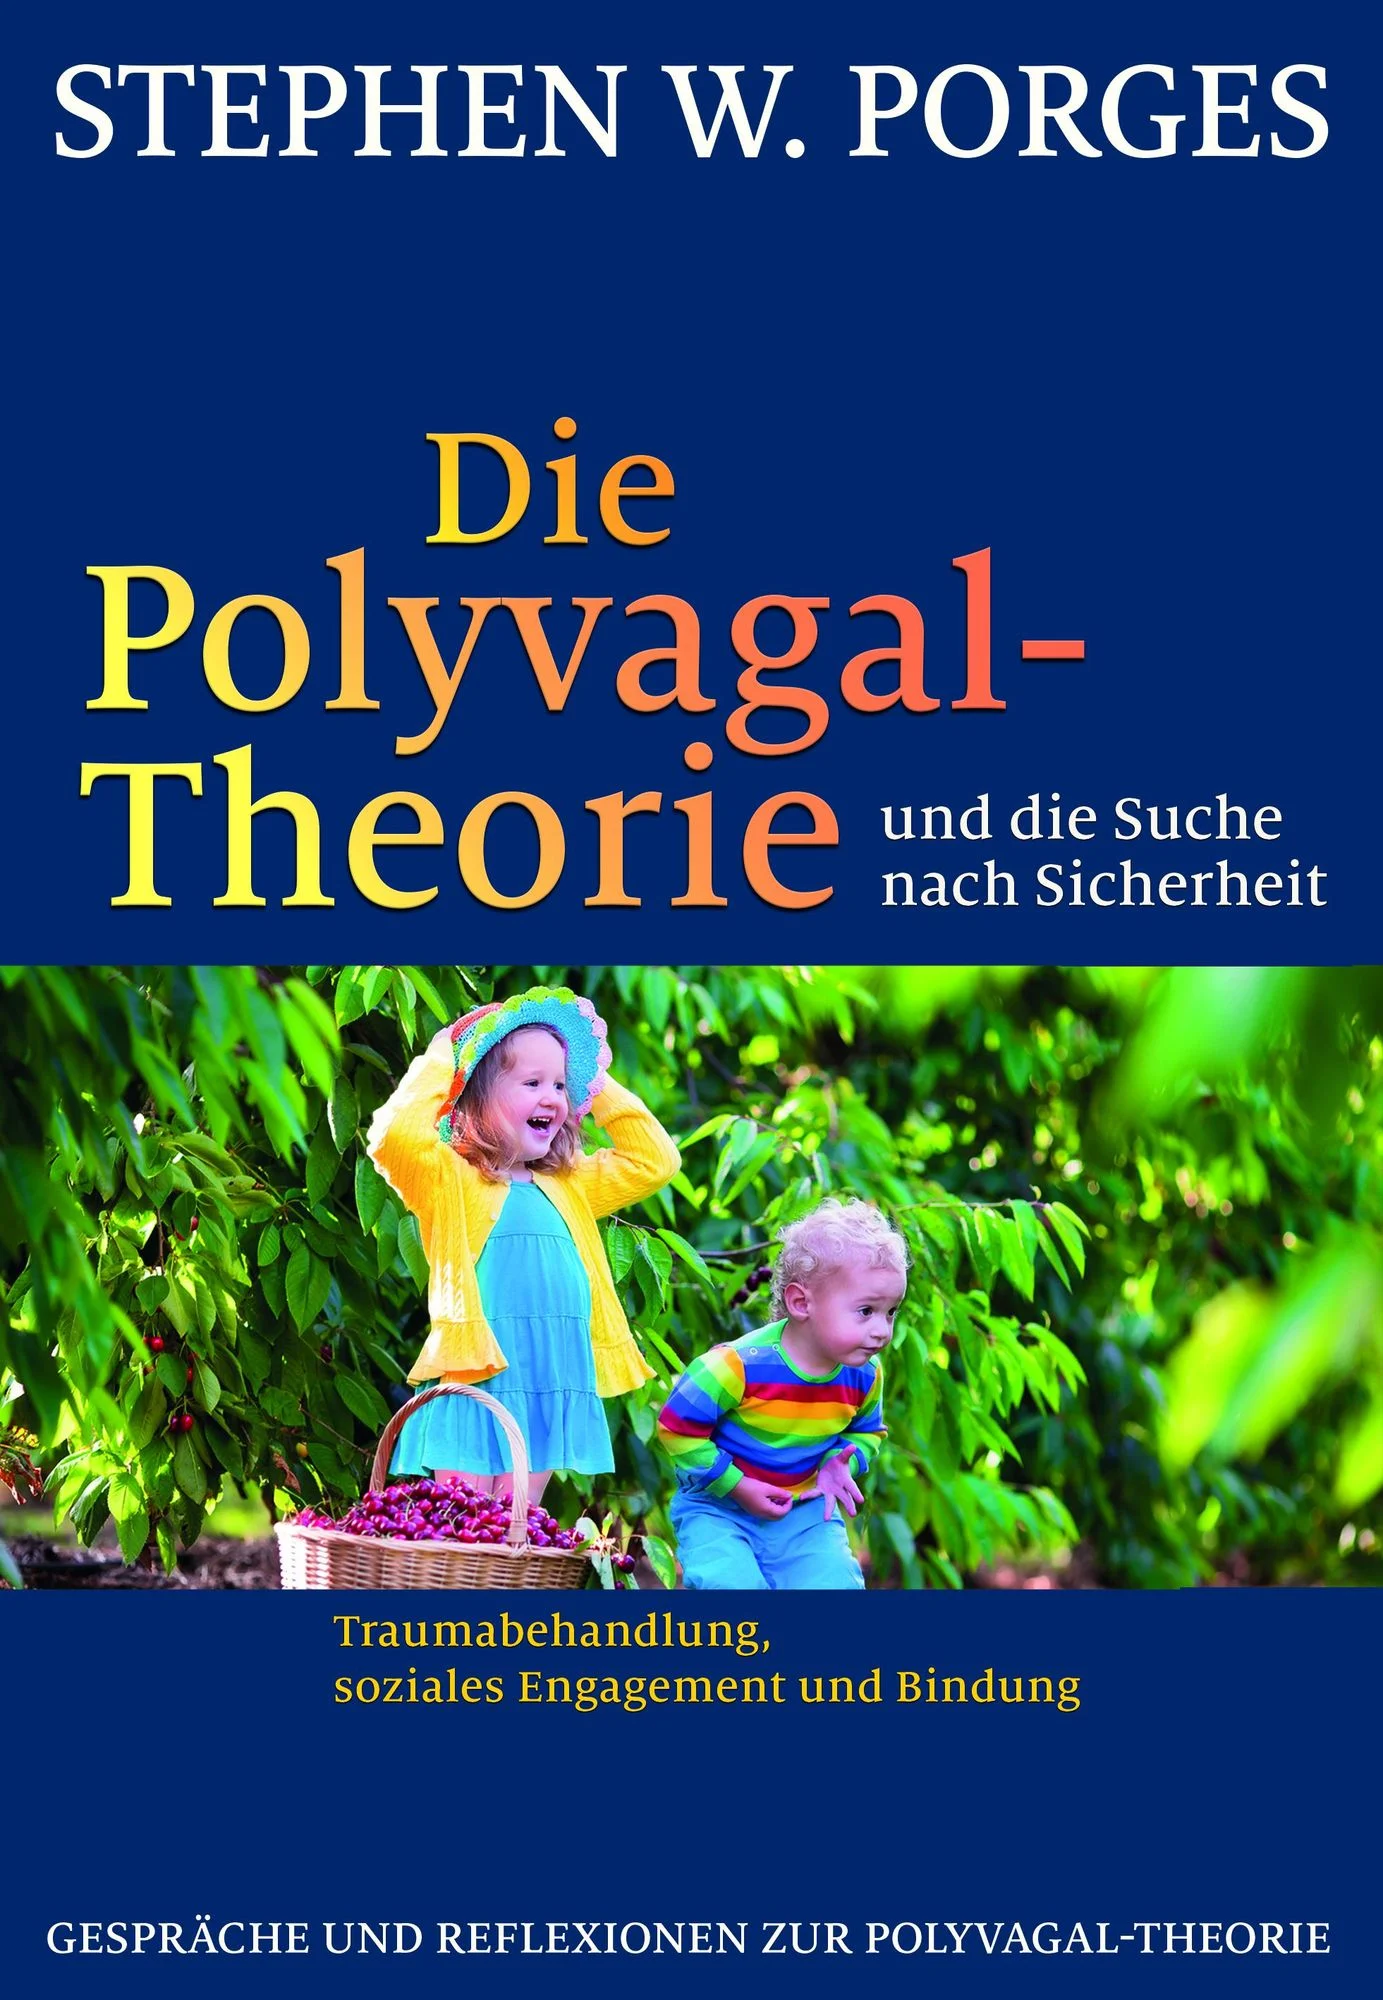 Polyvgaal-Theorie